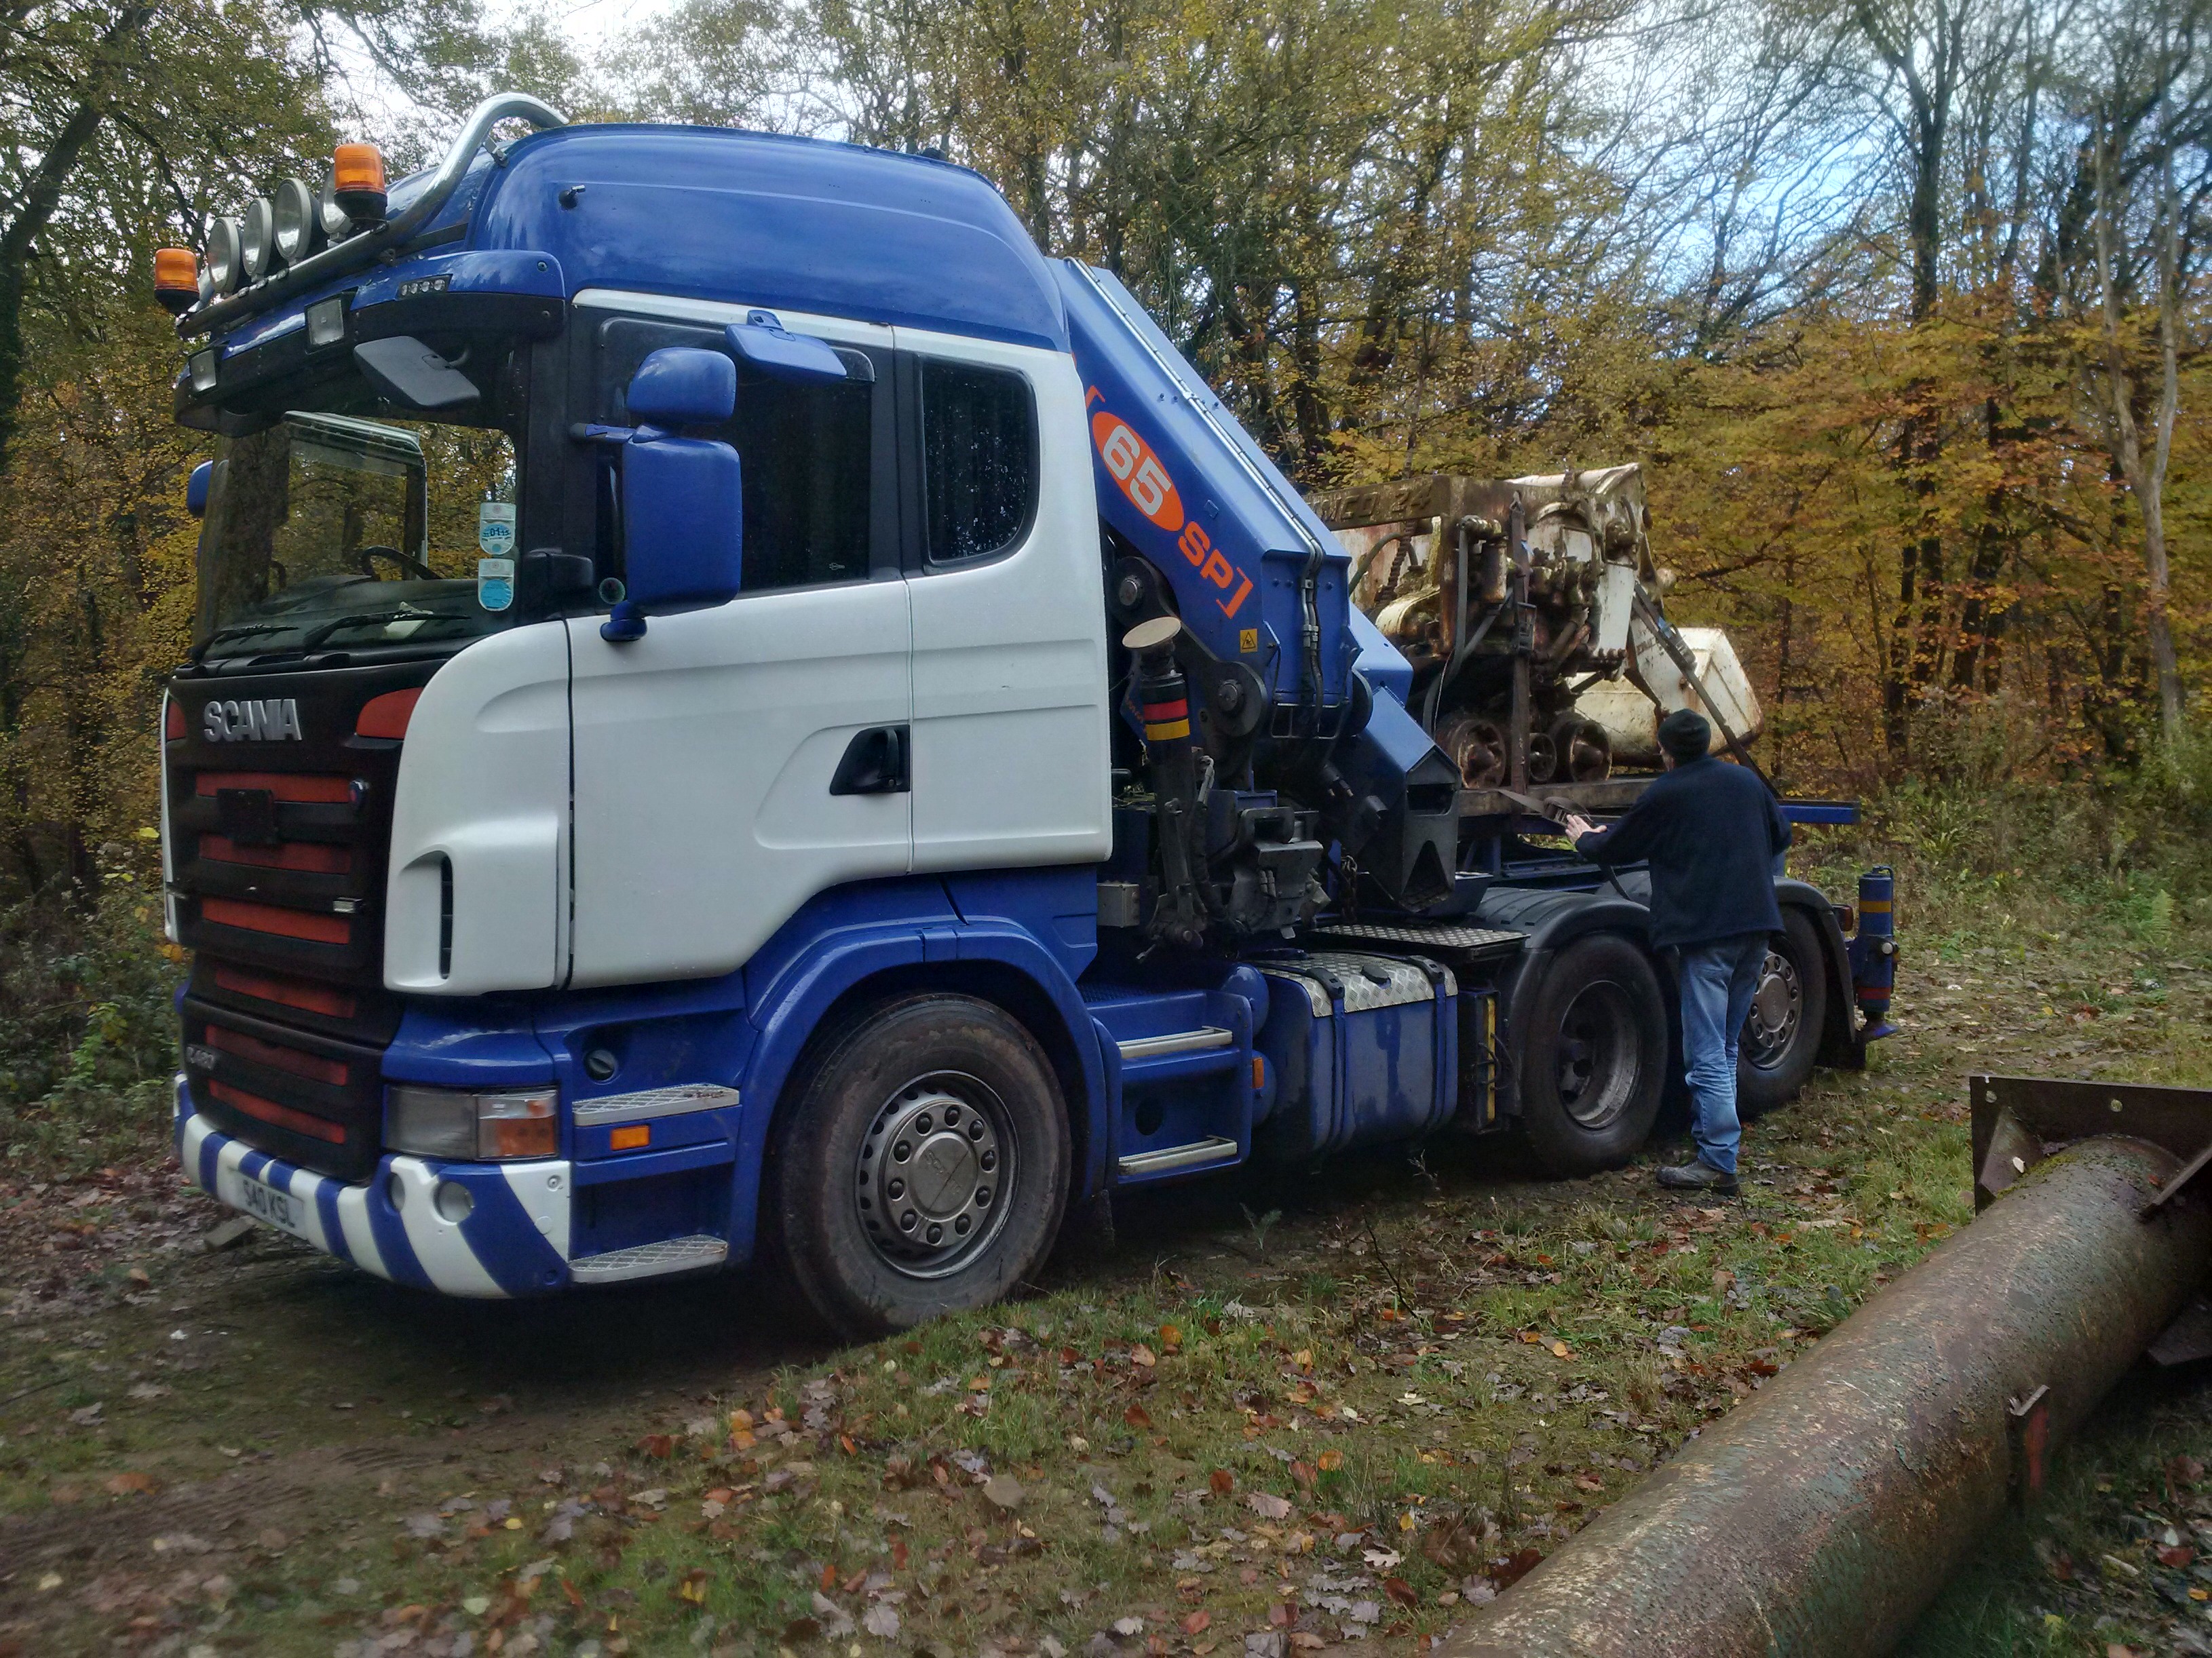 Eimco 24 arrives on Hiab tractor unit